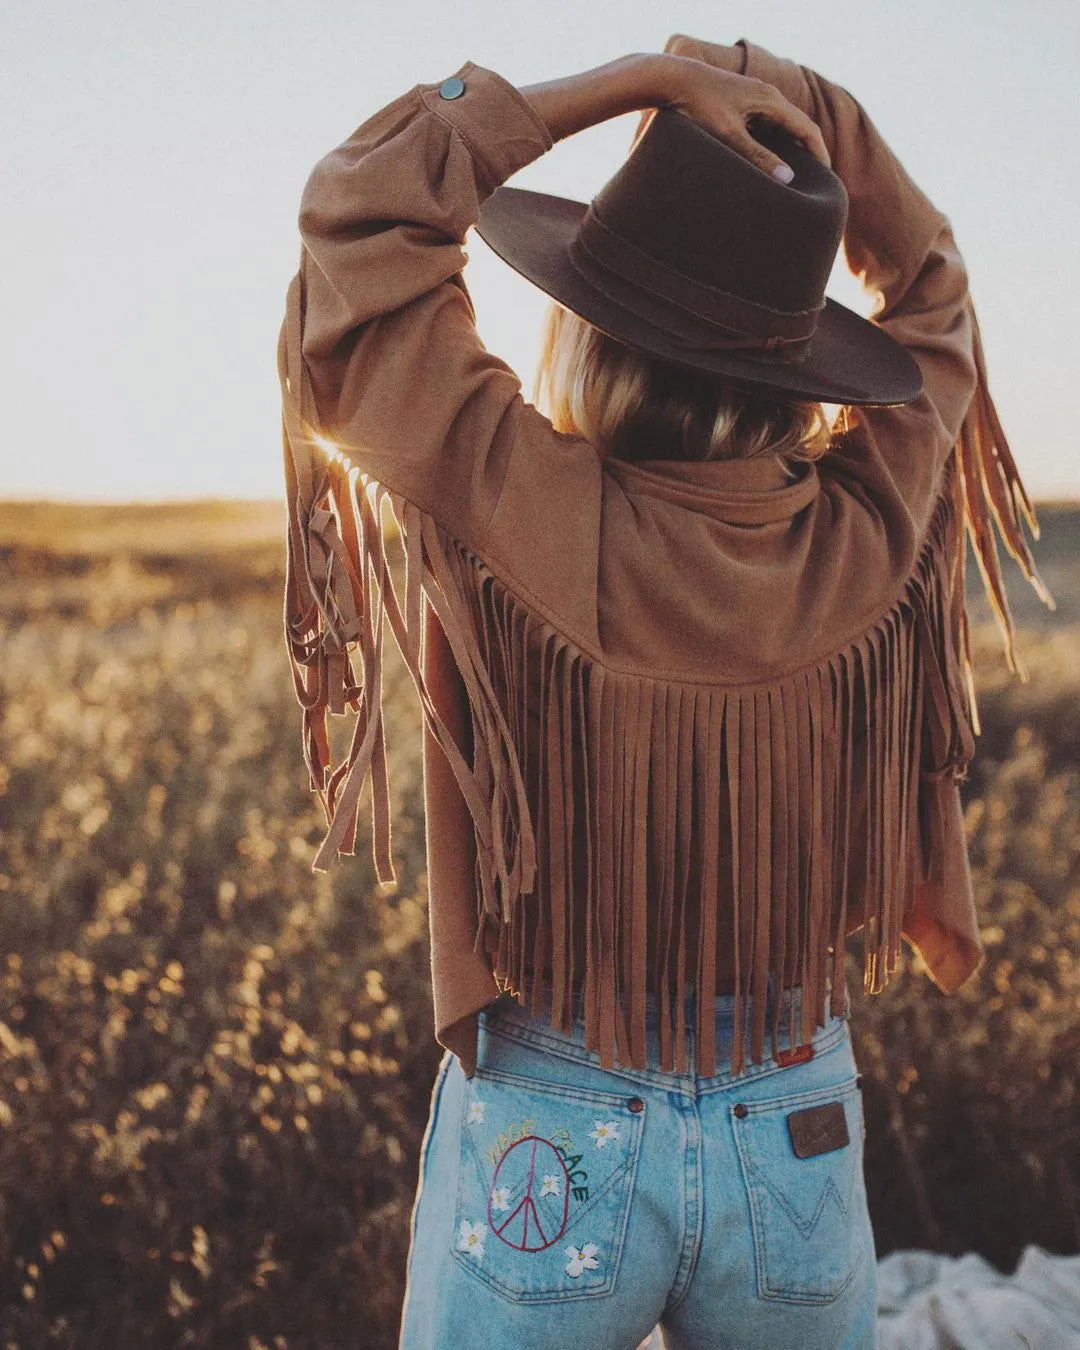 image of back of girl wearing a brown fringe jacket, blue jeans and her arms above her head with her hands resting on a brown felt fedora hat from American Hat Makers (Java Hat)